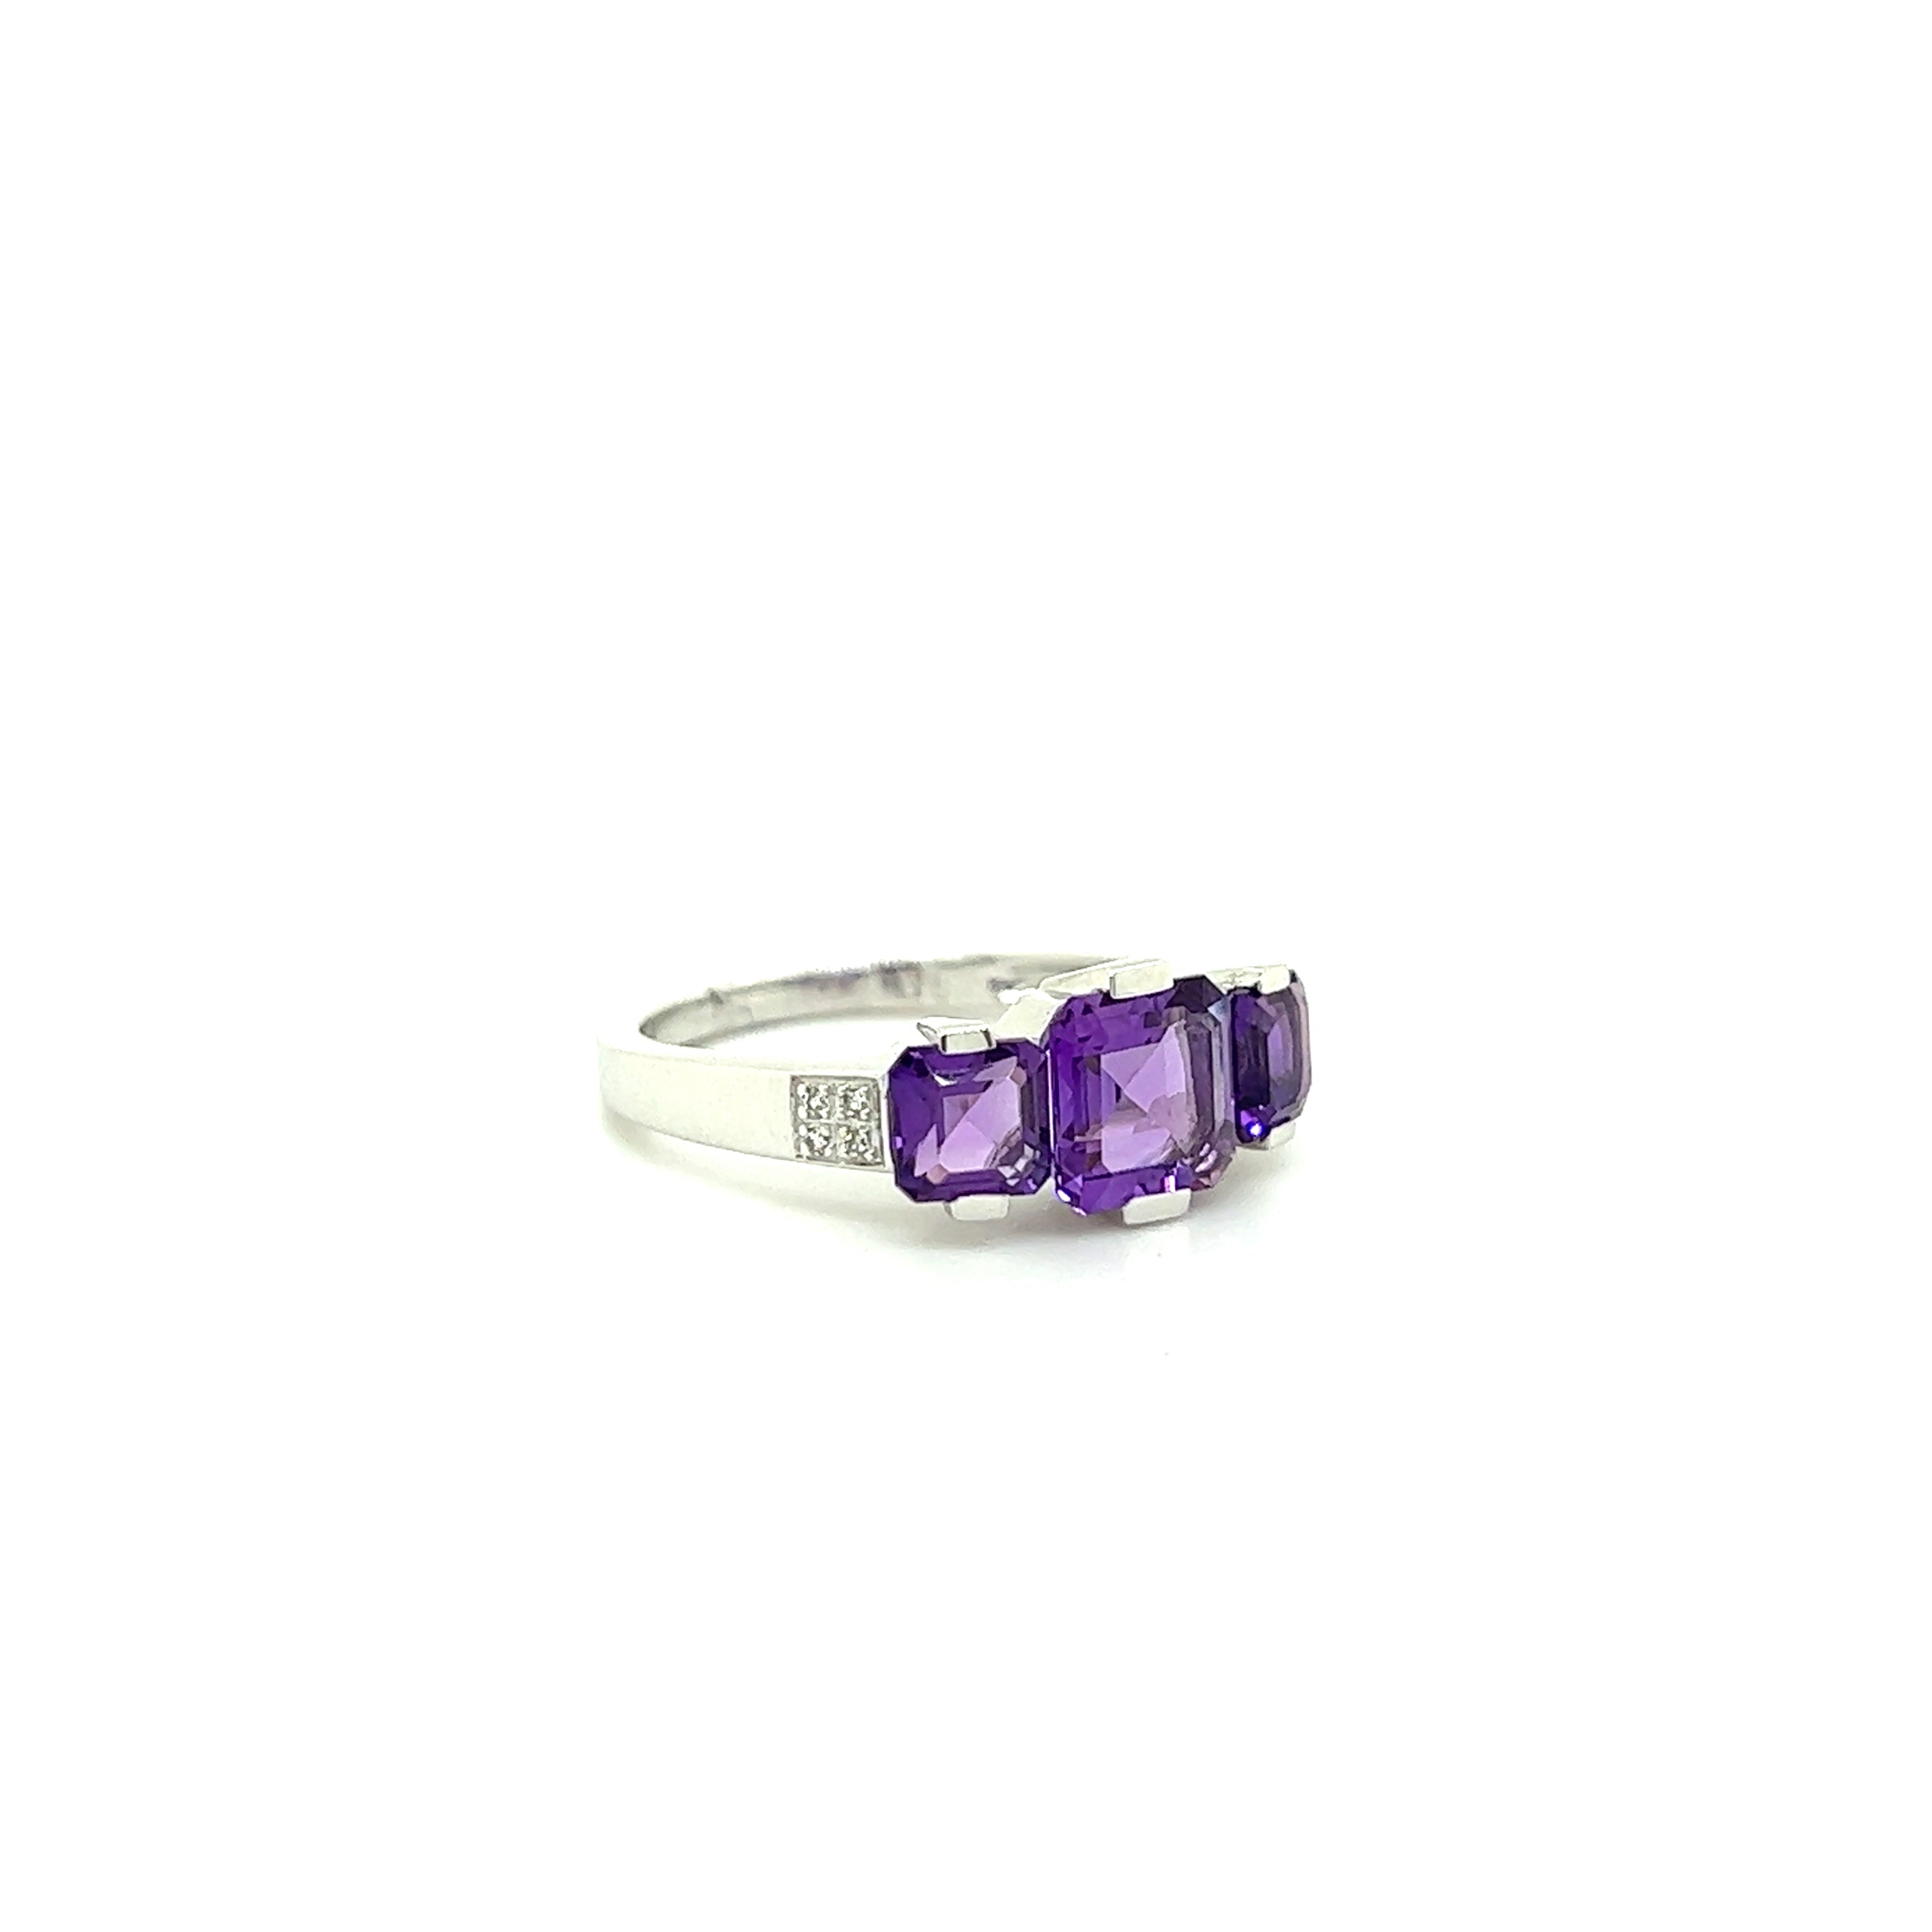 9ct white gold amethyst and diamond ring